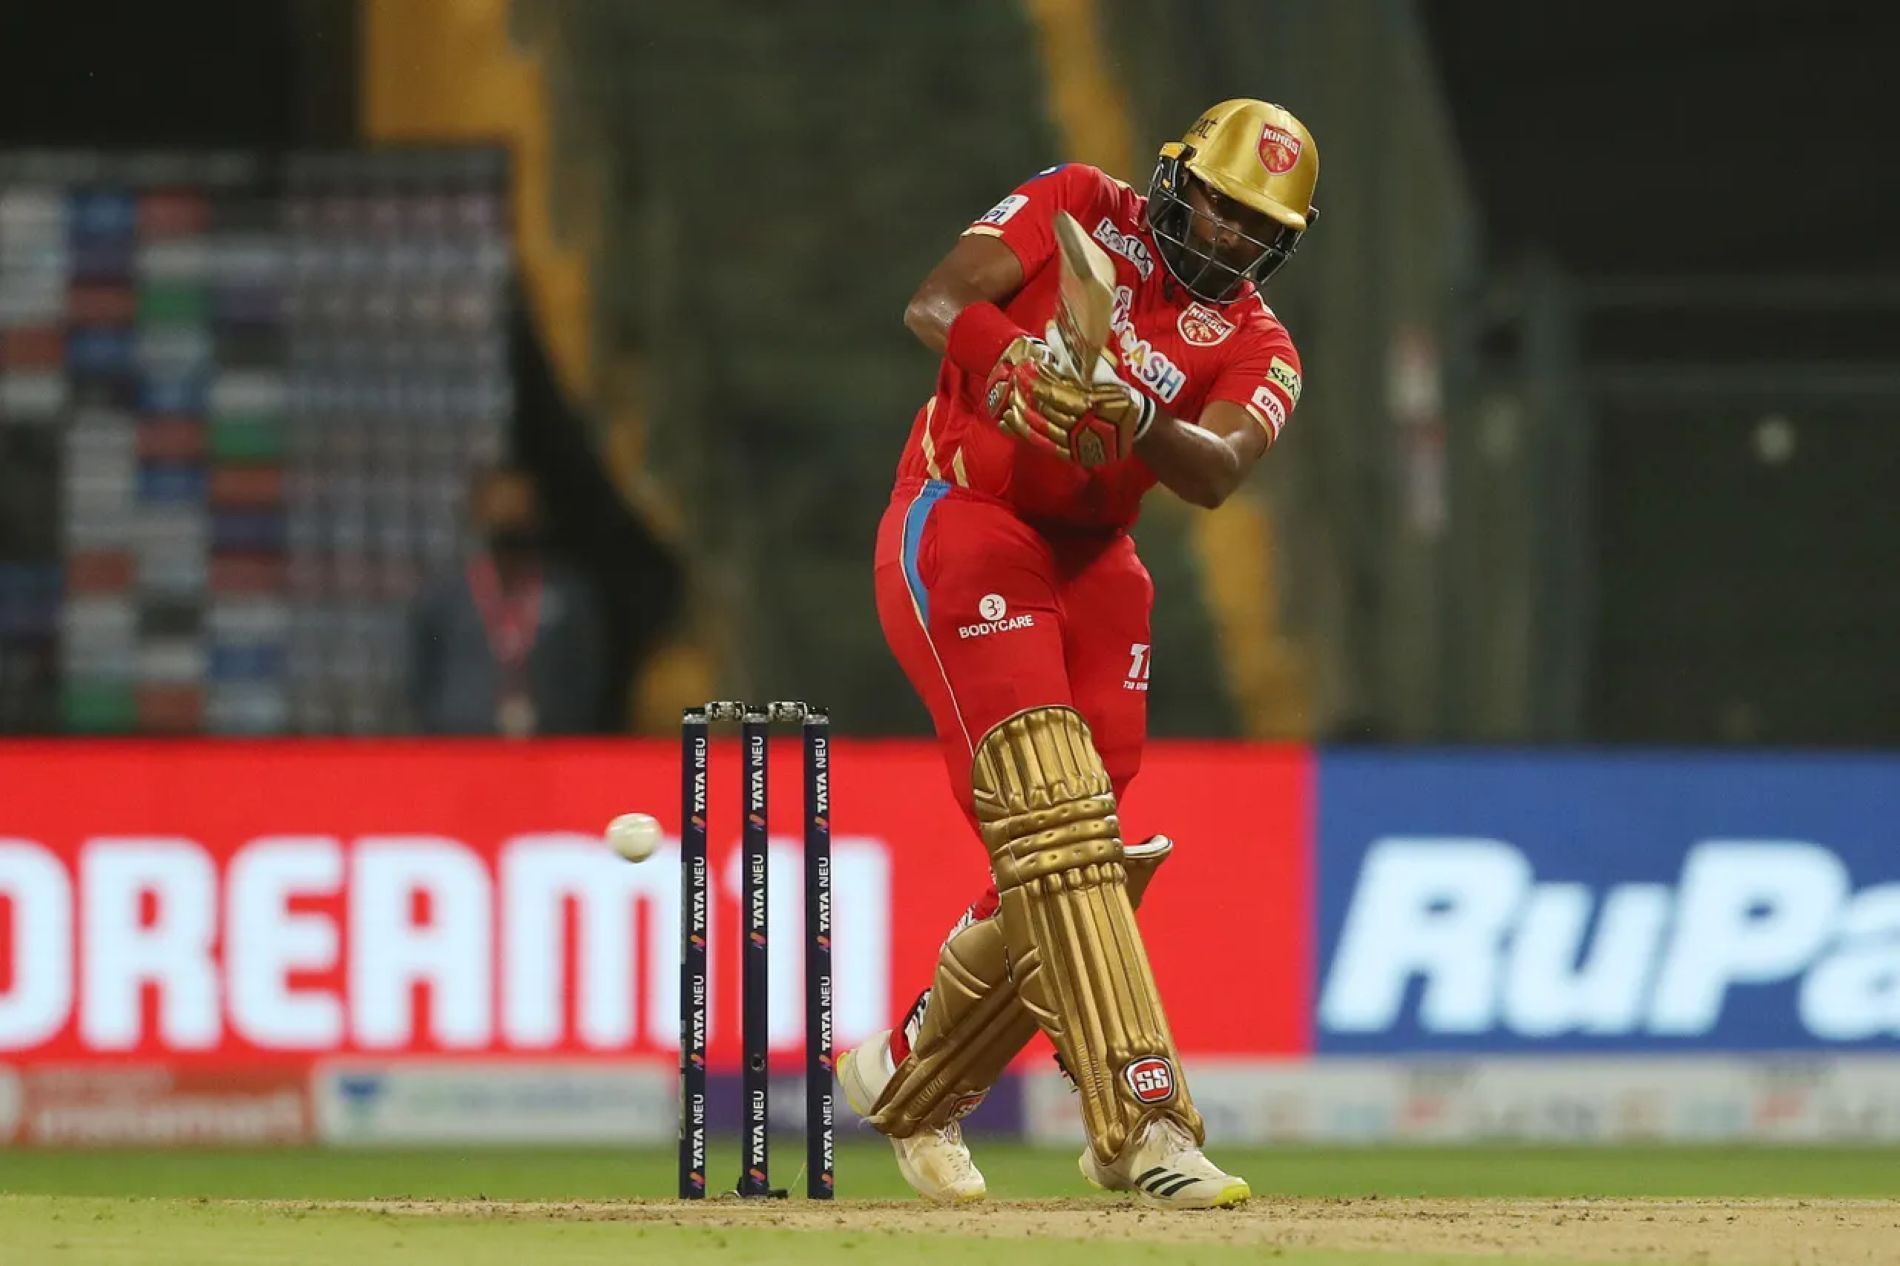 Rajapaksha would look to improve his consistency from IPL 2022 to IPL 2023